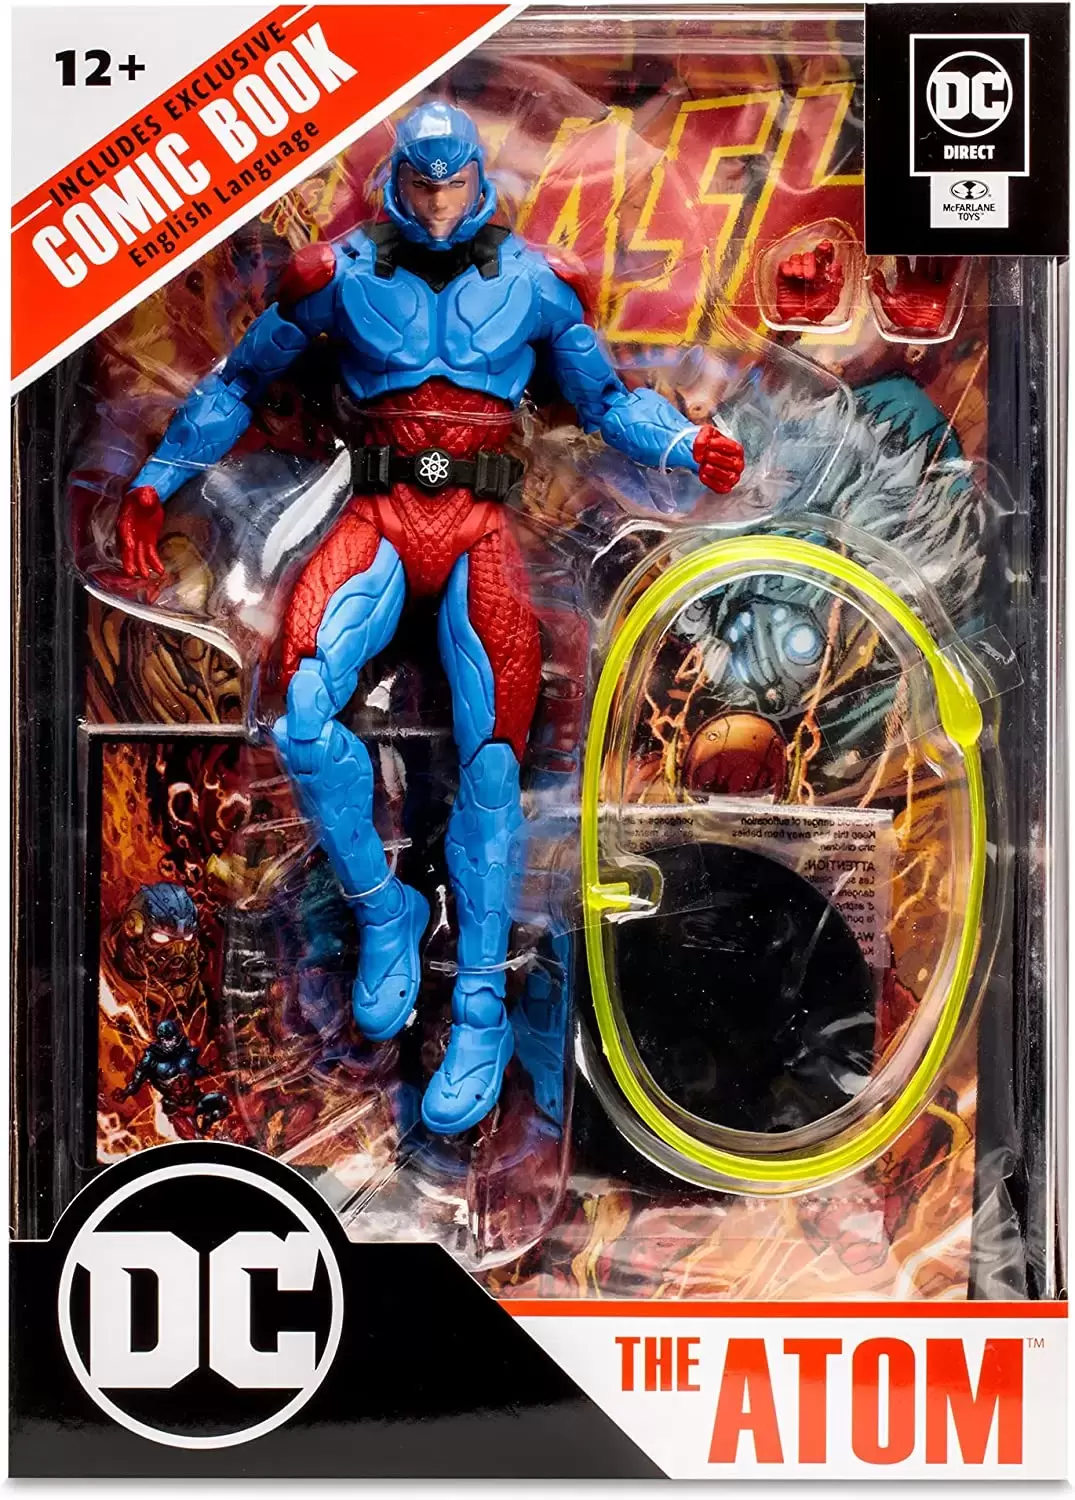 McFarlane - DC Page Punchers - The Atom - The Flash (DC Direct - Page Punchers)